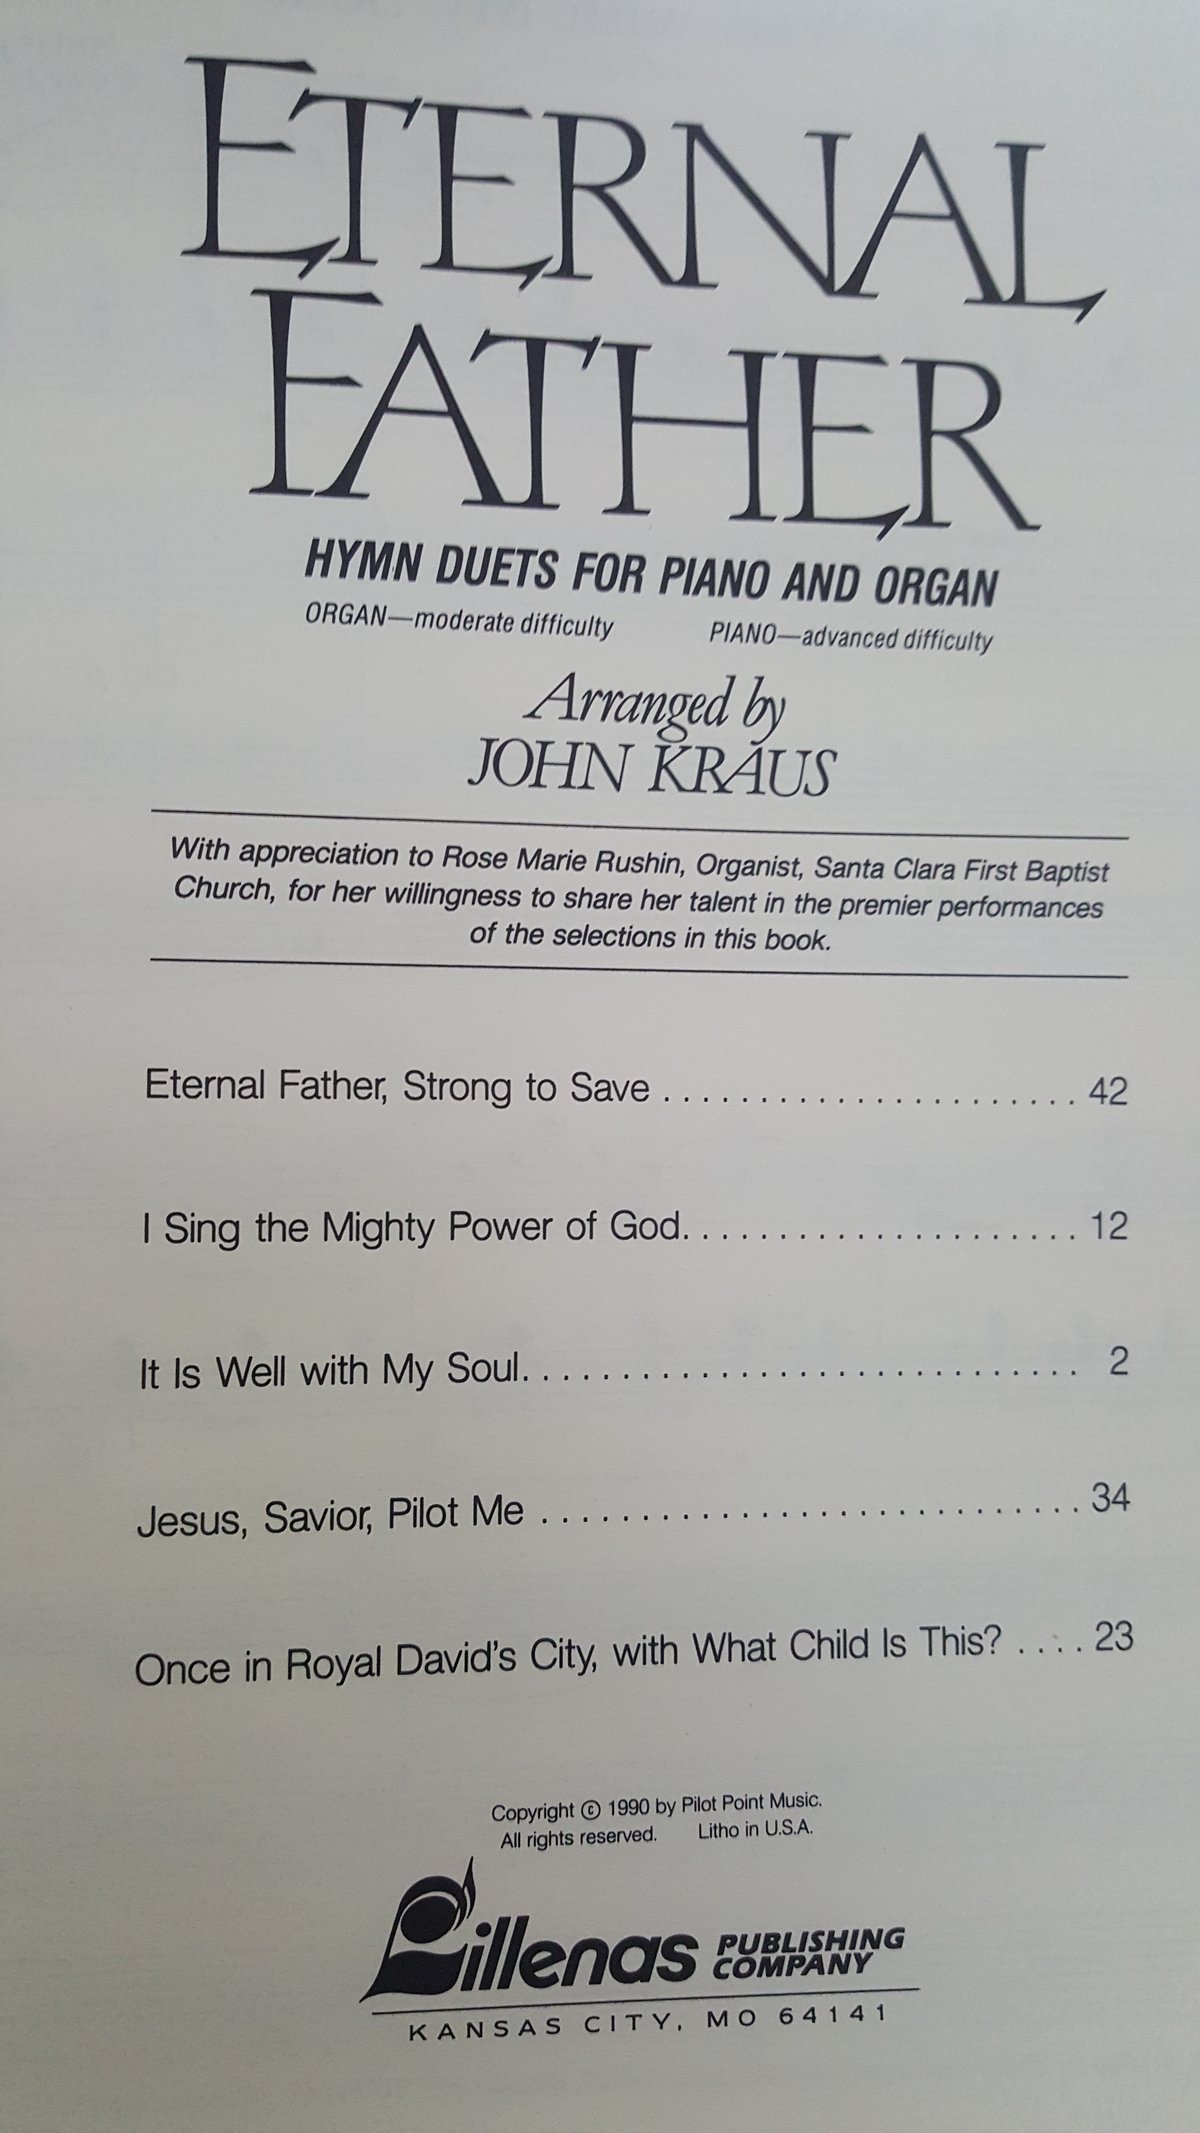 Image of Eternal Father (piano/organ duet book)